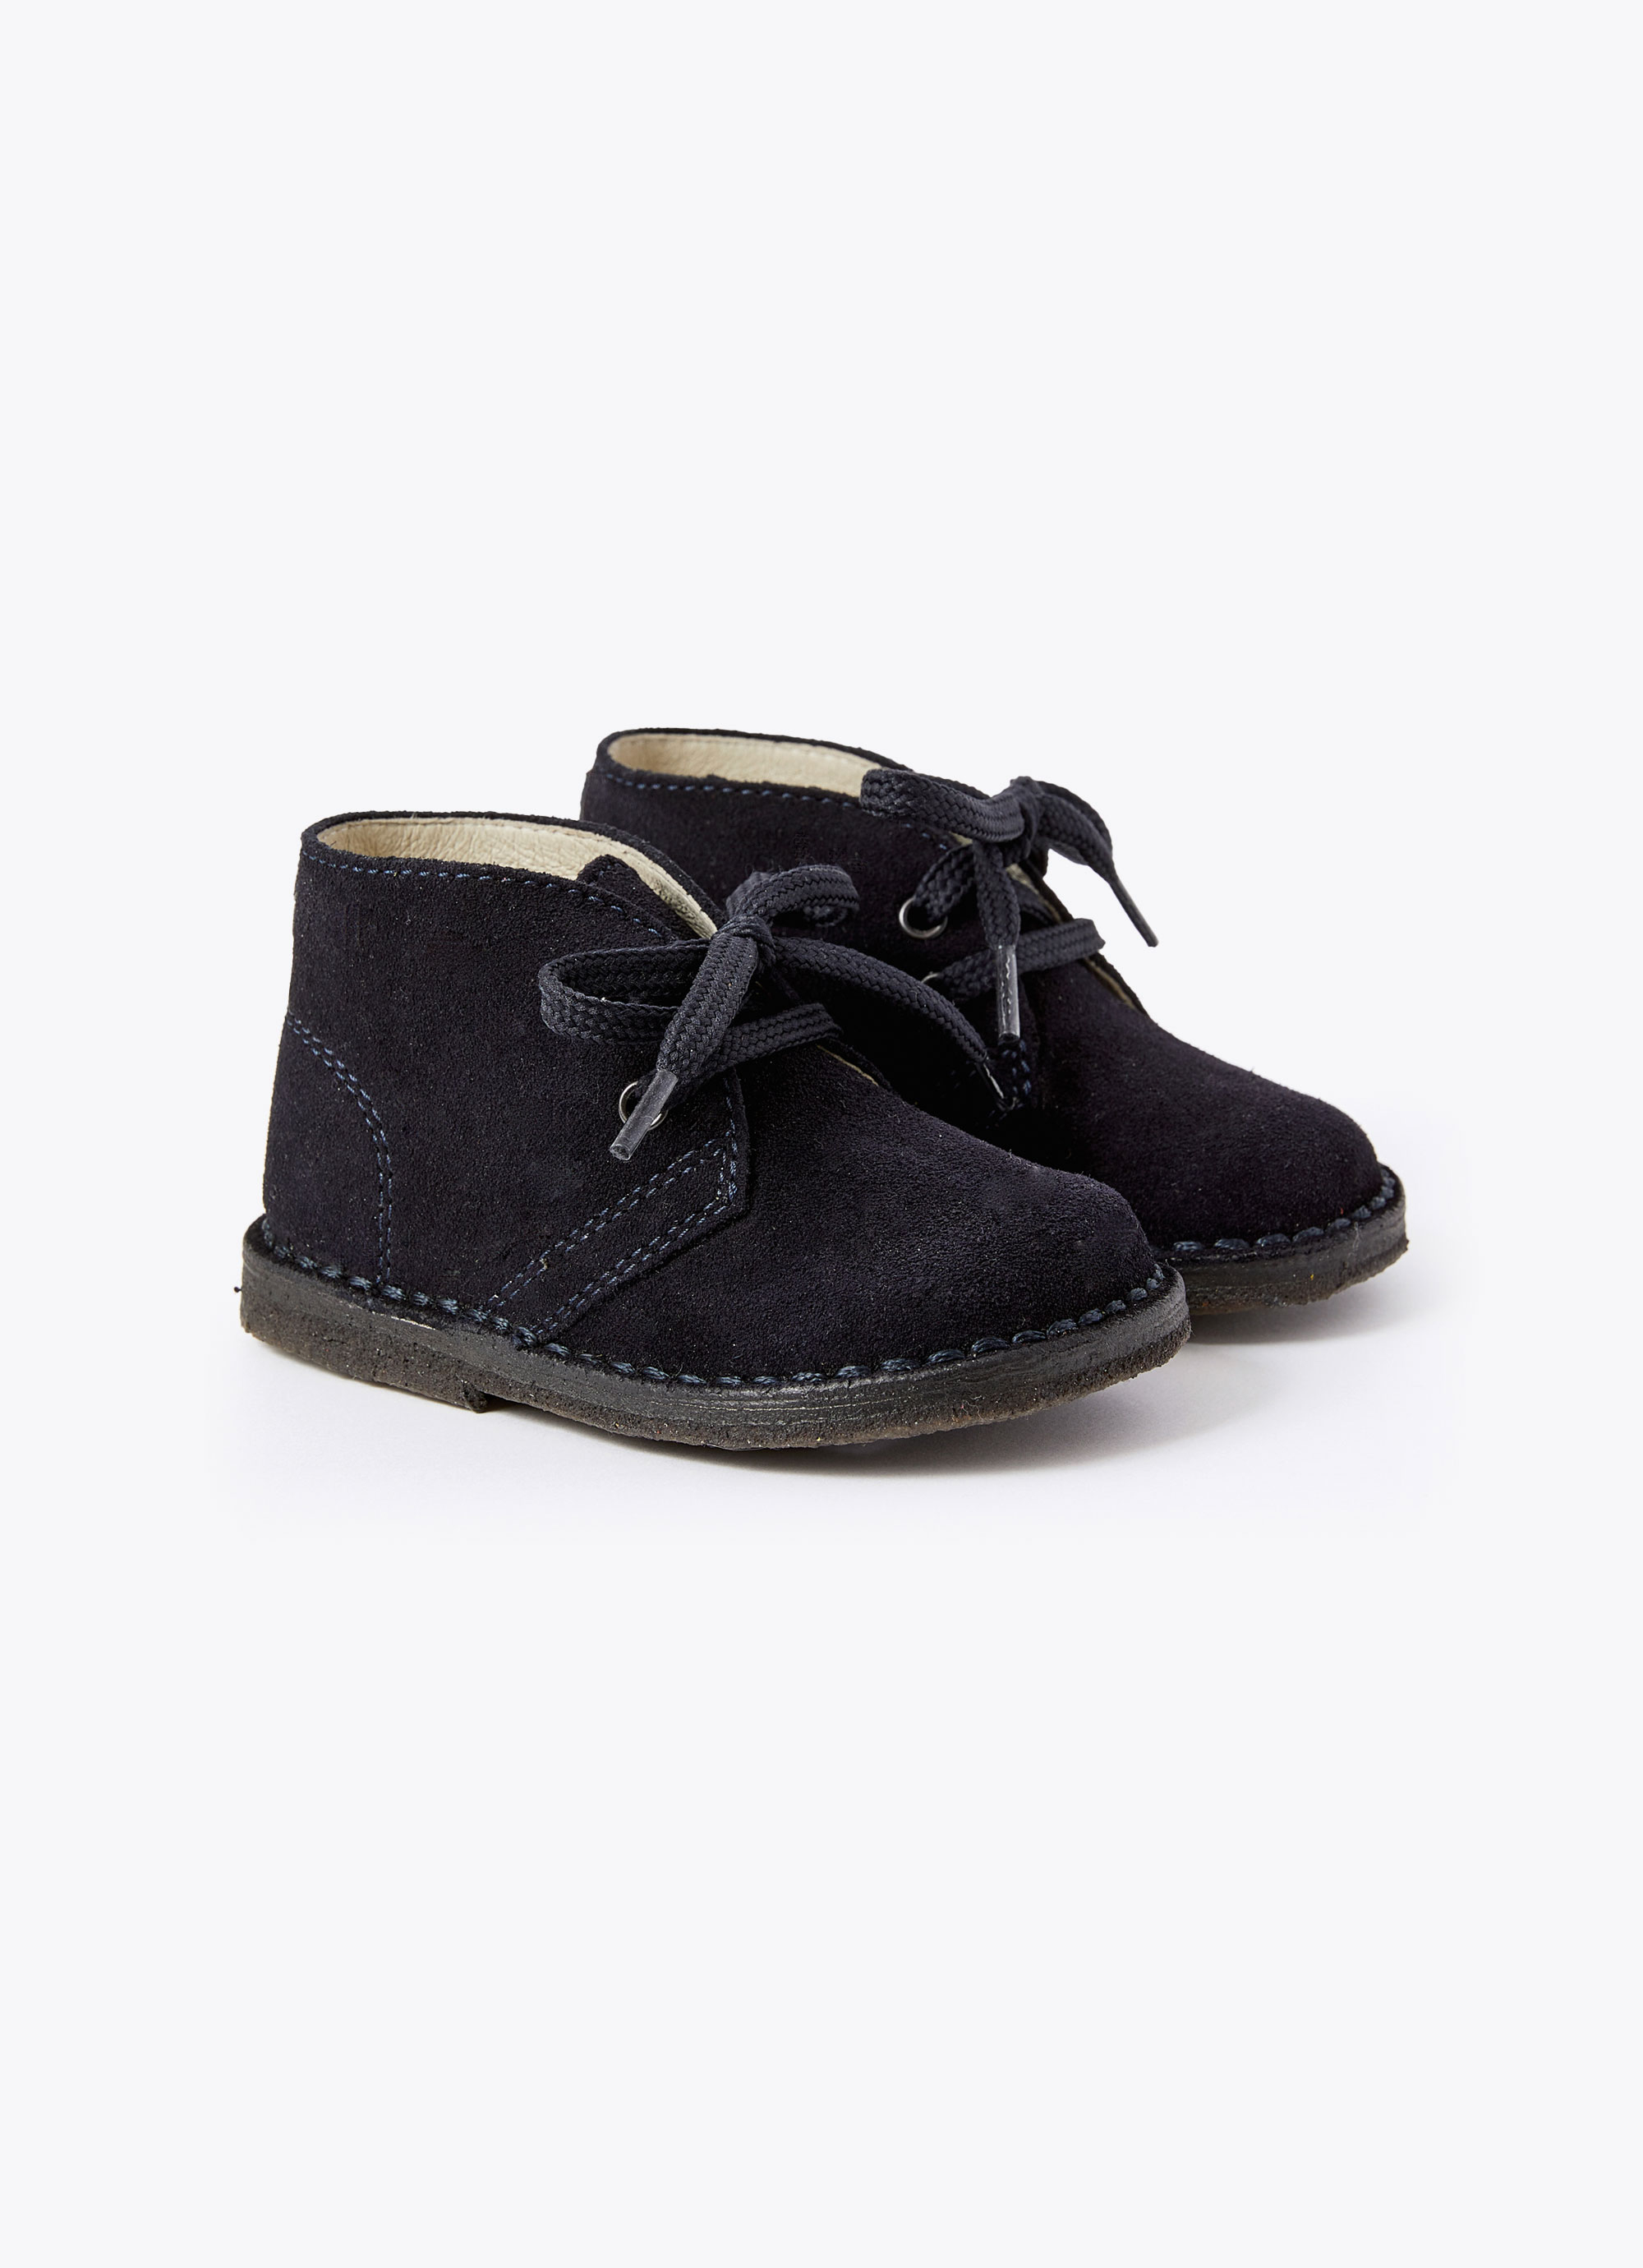 Navy suede baby shoes - Shoes - Il Gufo